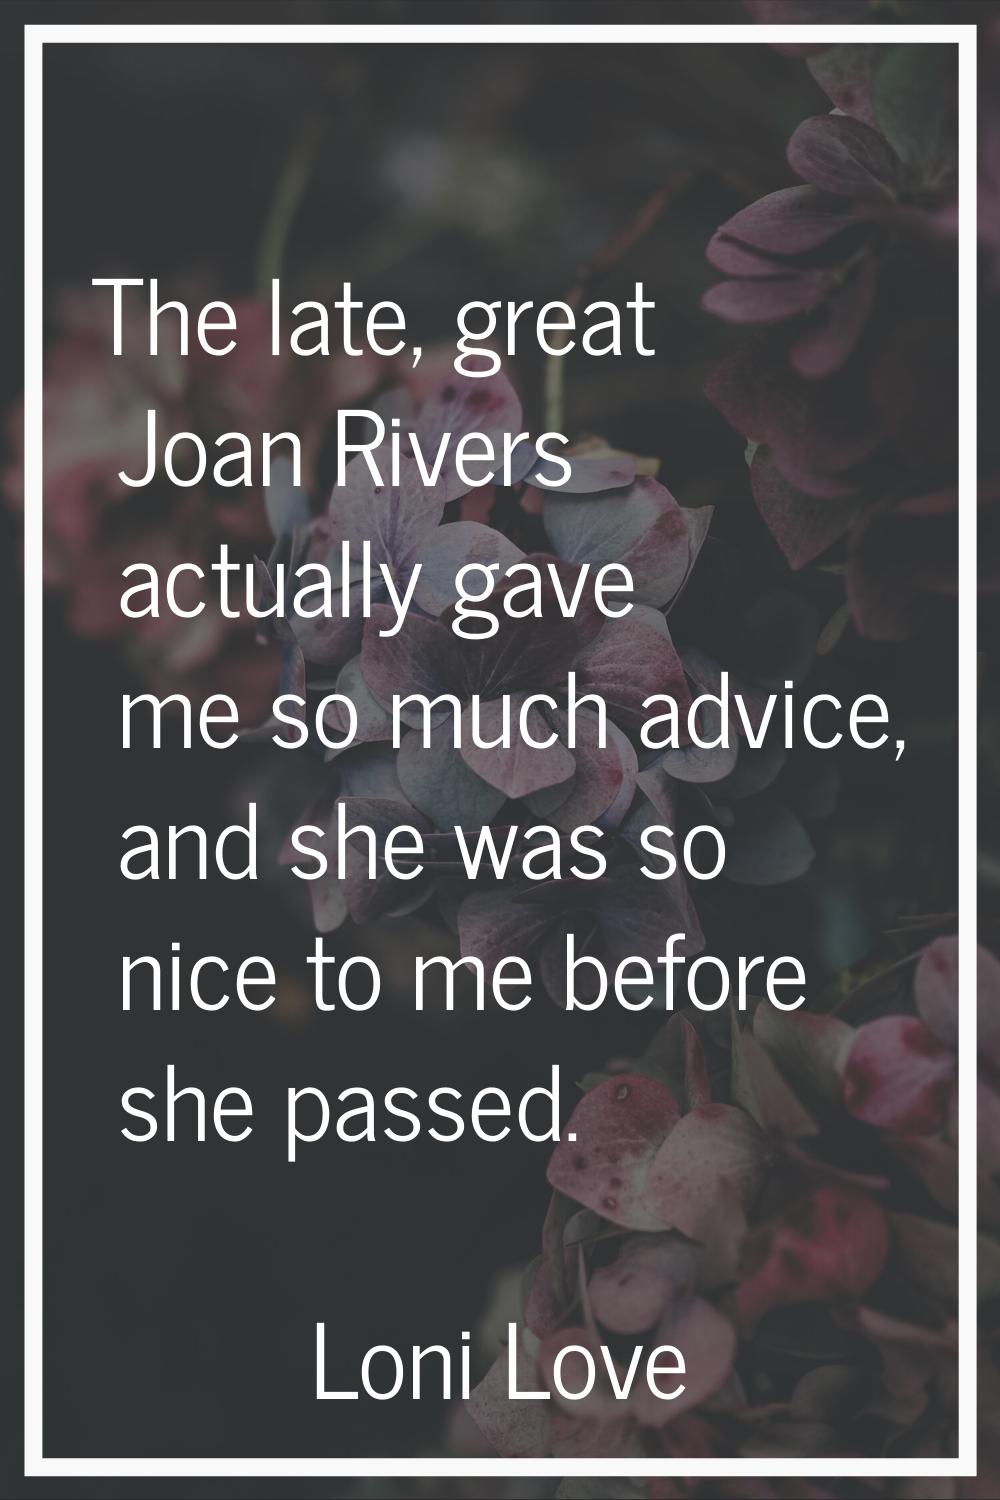 The late, great Joan Rivers actually gave me so much advice, and she was so nice to me before she p